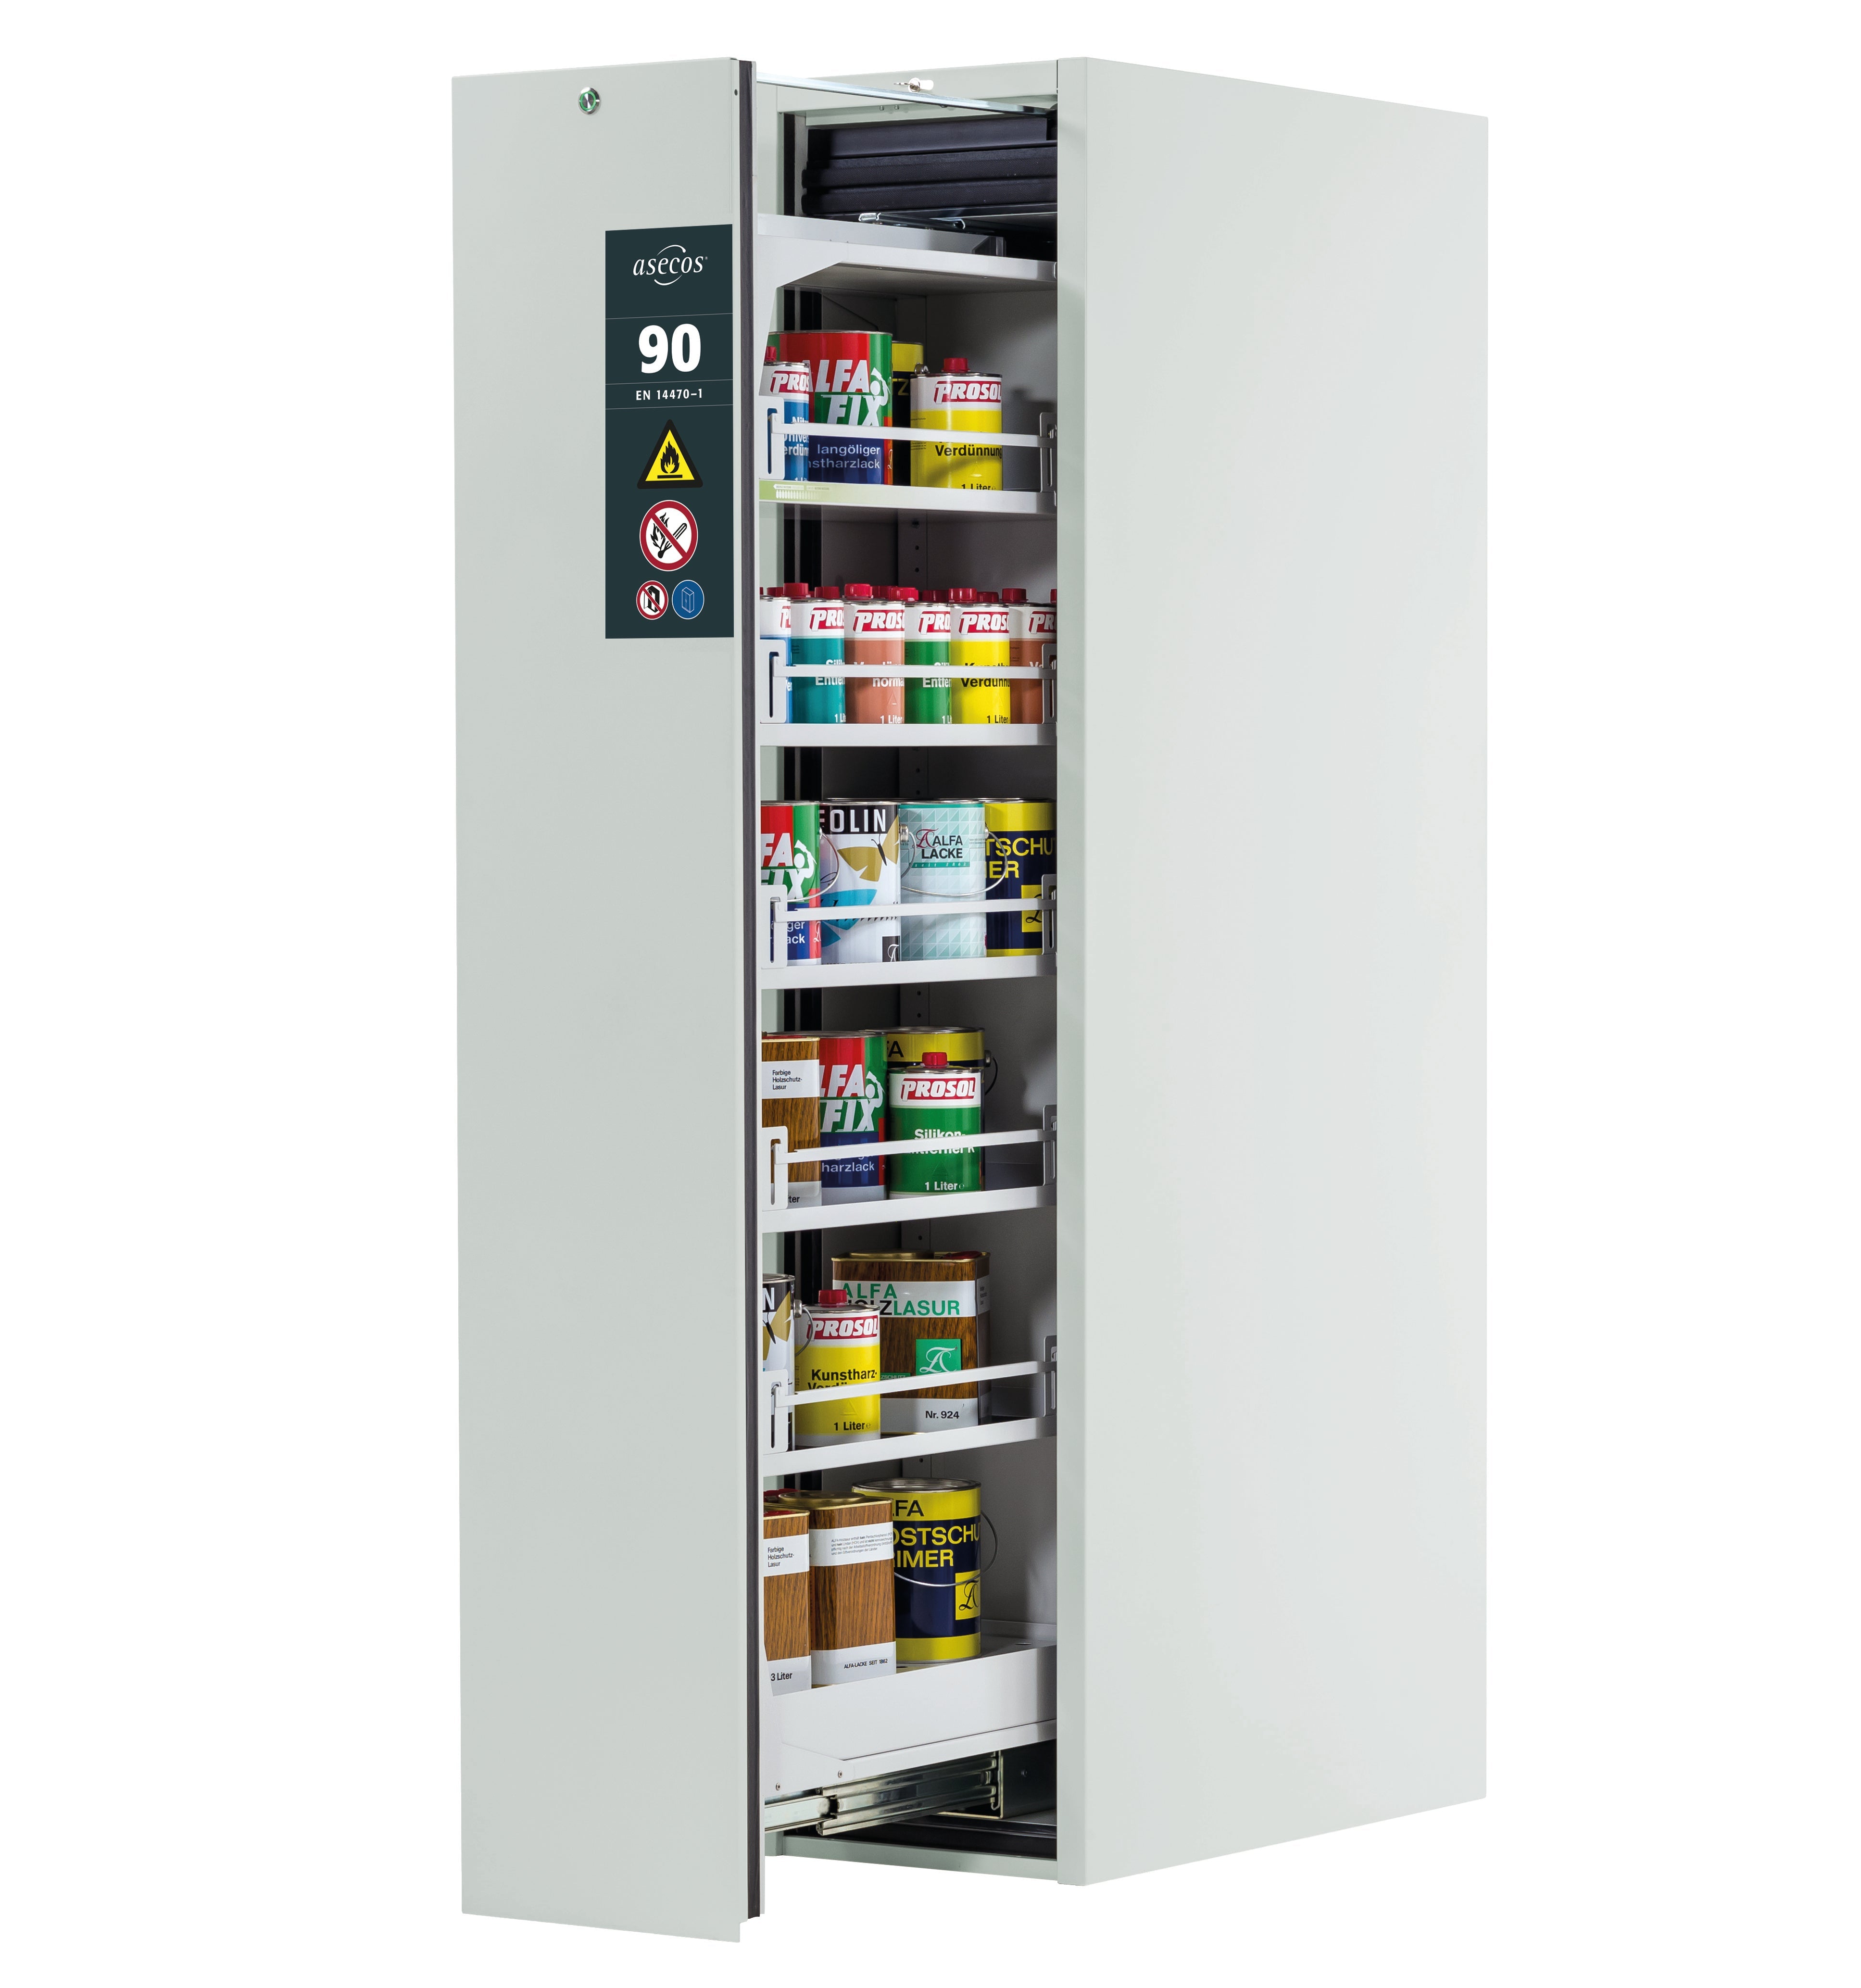 Type 90 safety cabinet V-MOVE-90 model V90.196.045.VDAC:0012 in light gray RAL 7035 with 5x standard shelves (sheet steel)